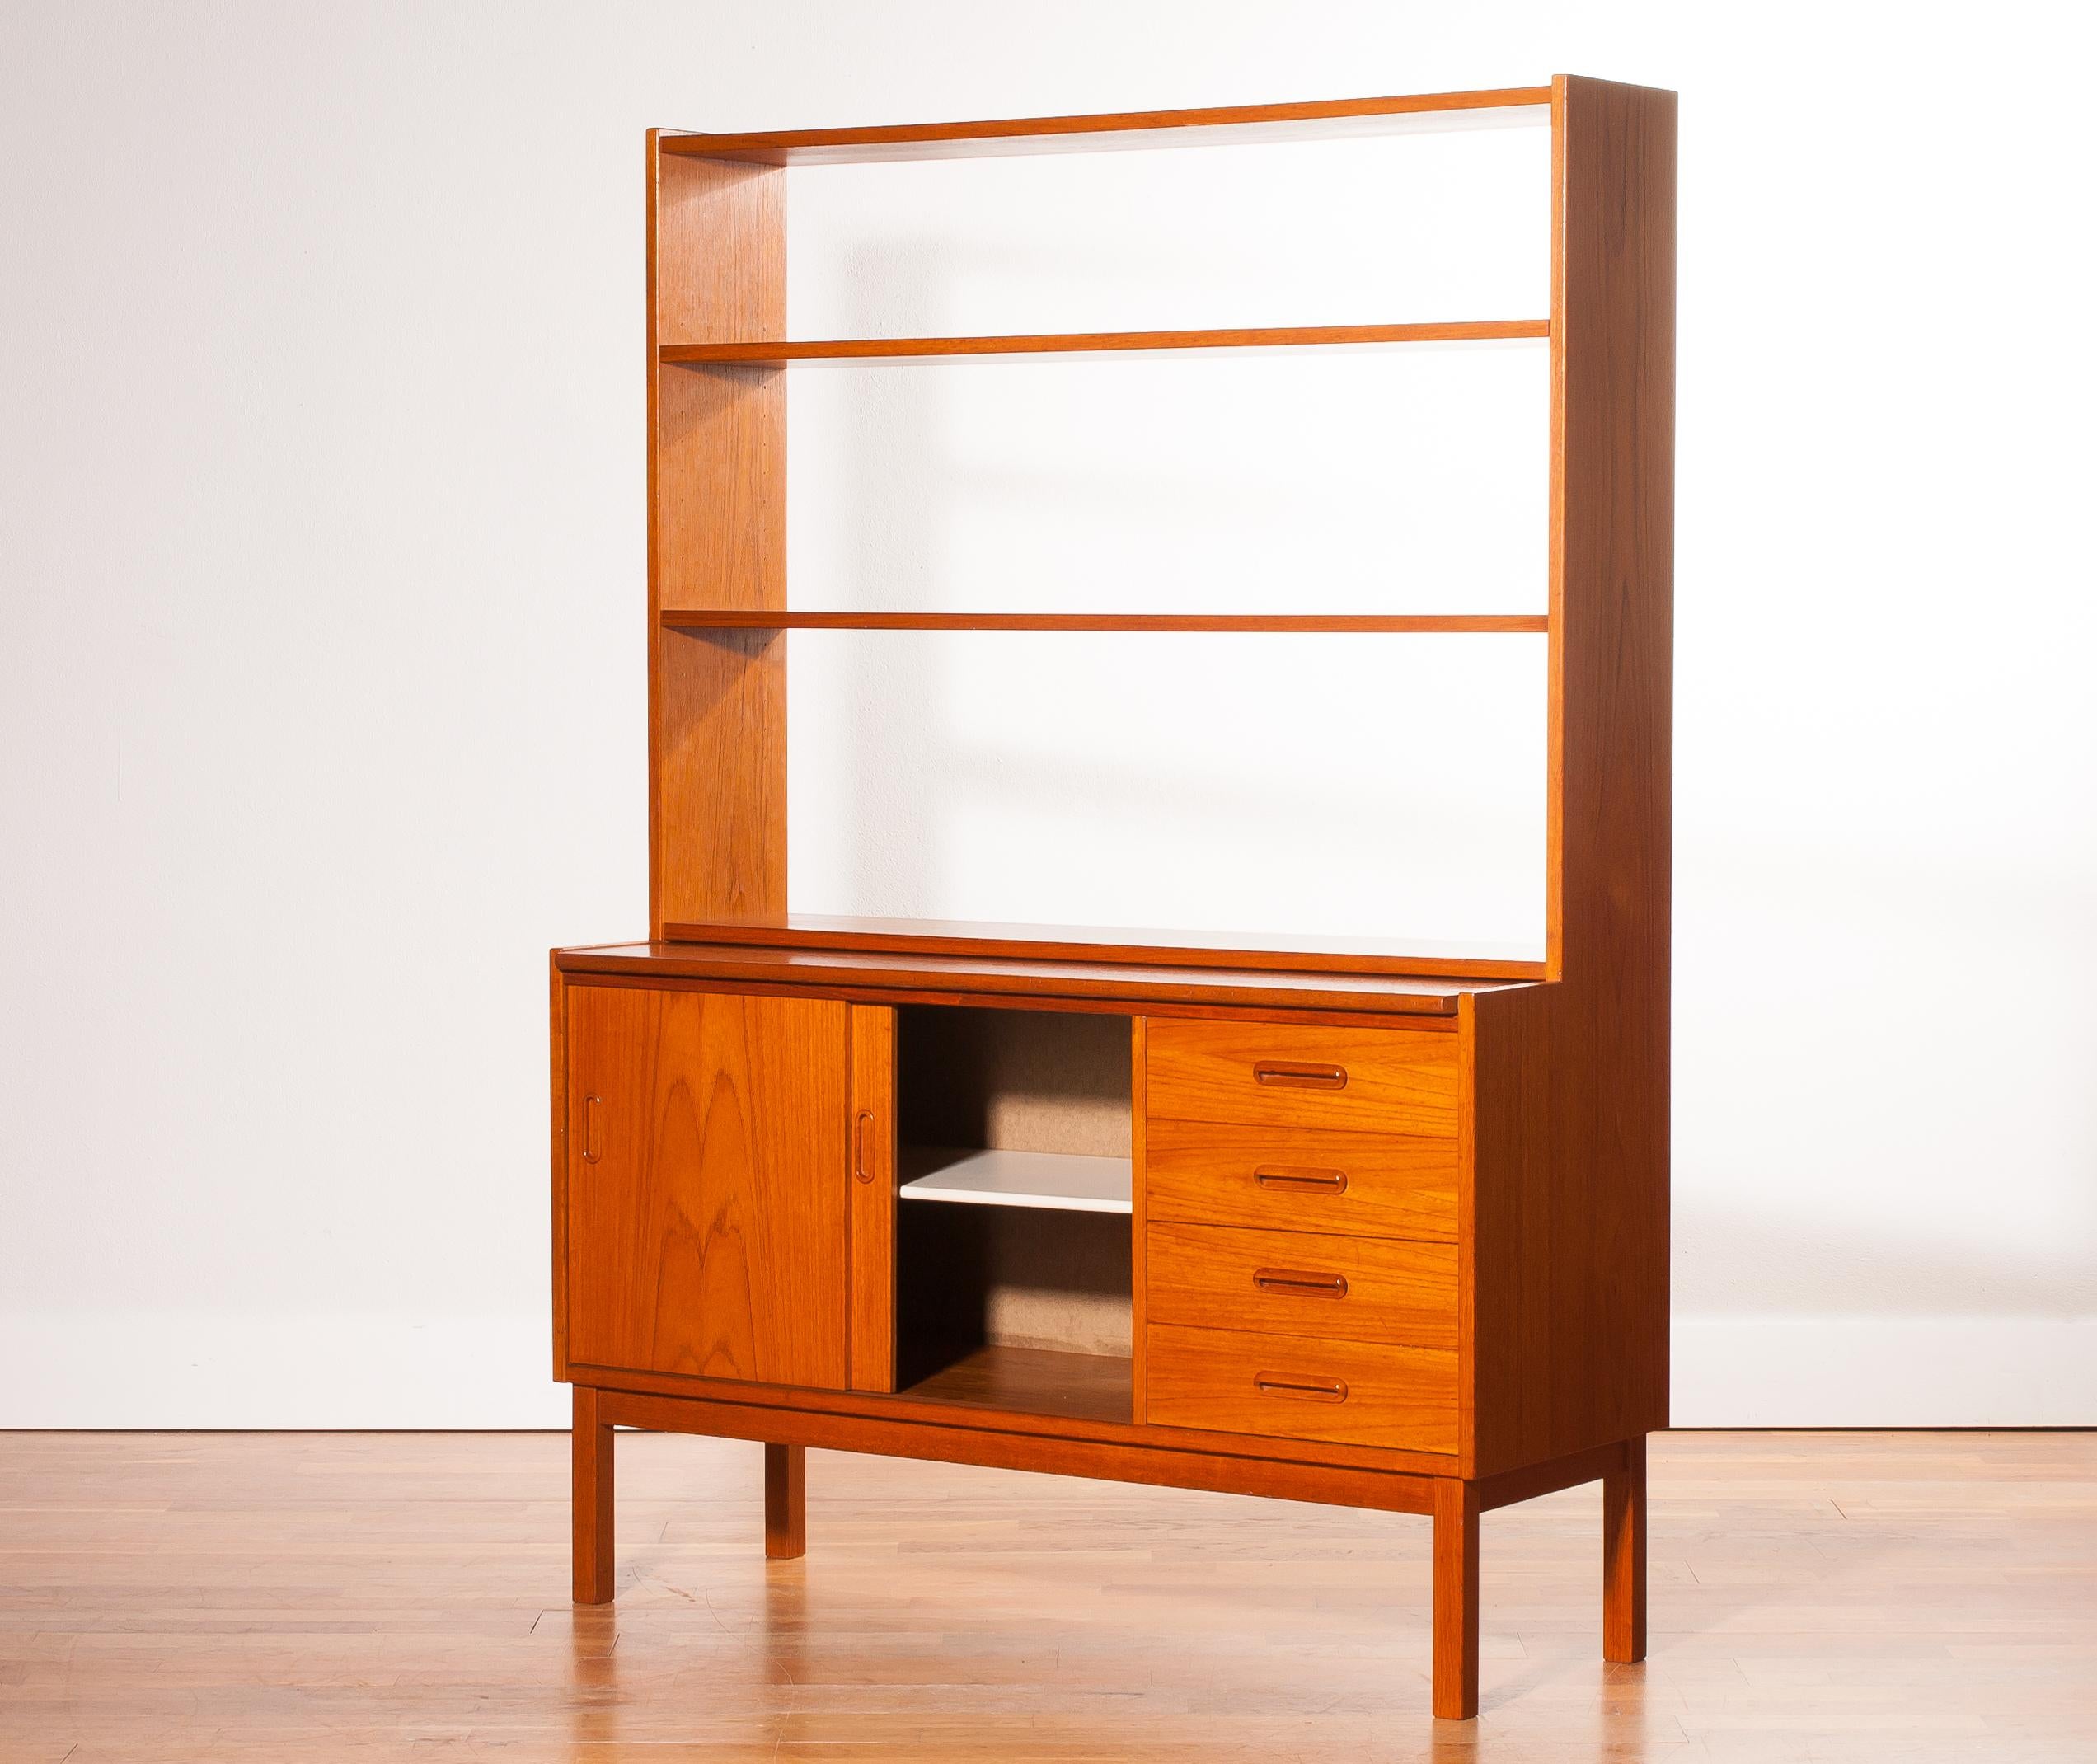 Mid-20th Century 1960s, Teak Book Case with Slidable Writing or Working Space from Sweden